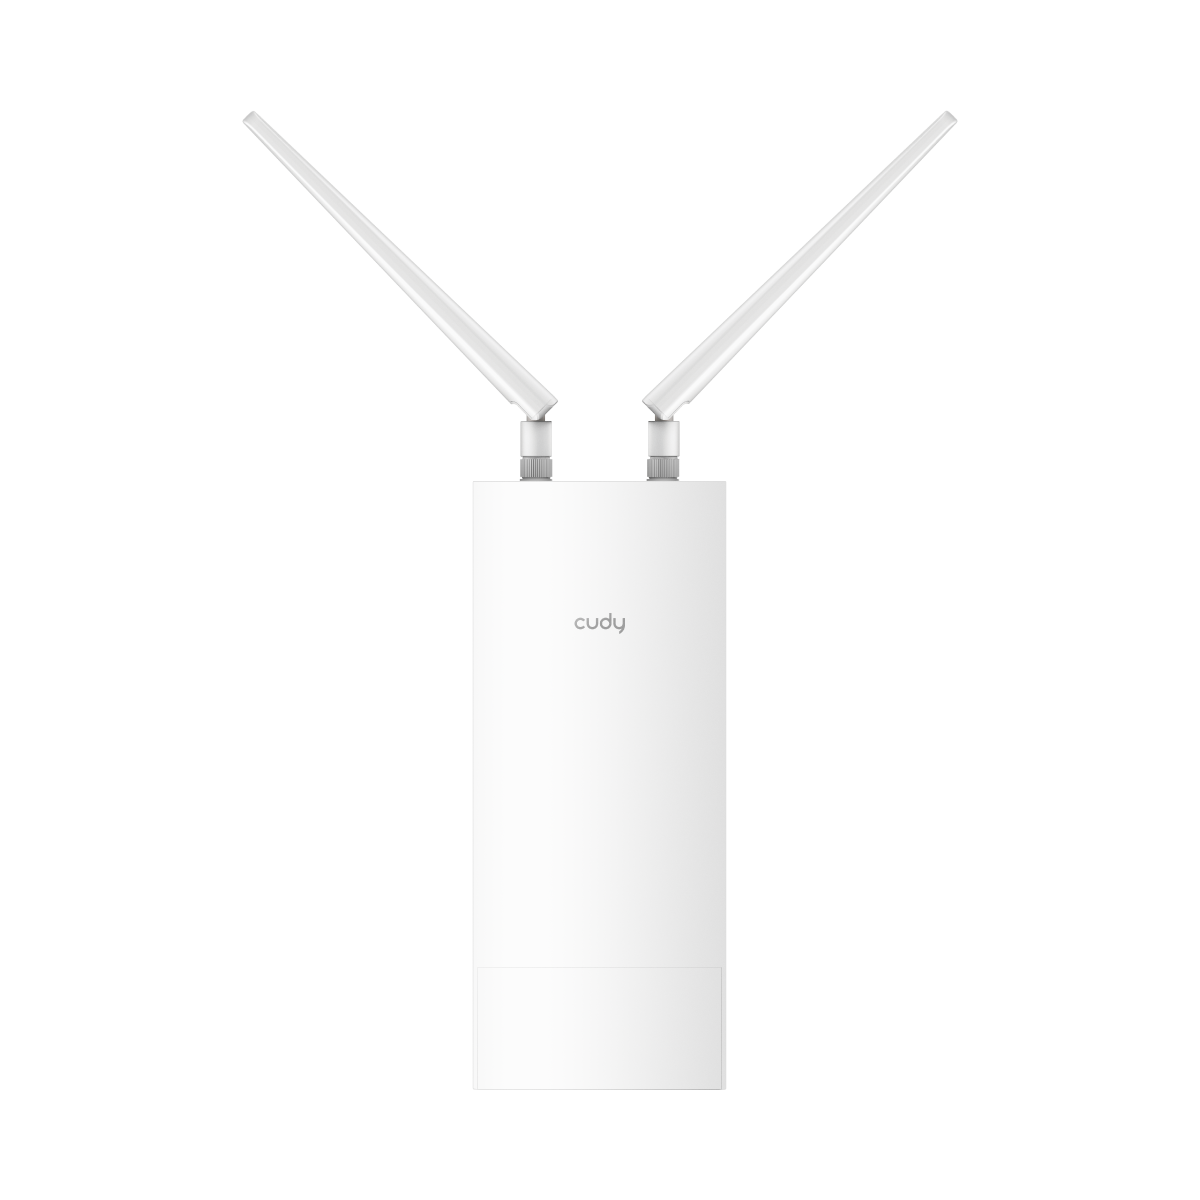 Outdoor/Indoor AC1200 Wi-Fi Access Point, AP1200 Outdoor 1.0